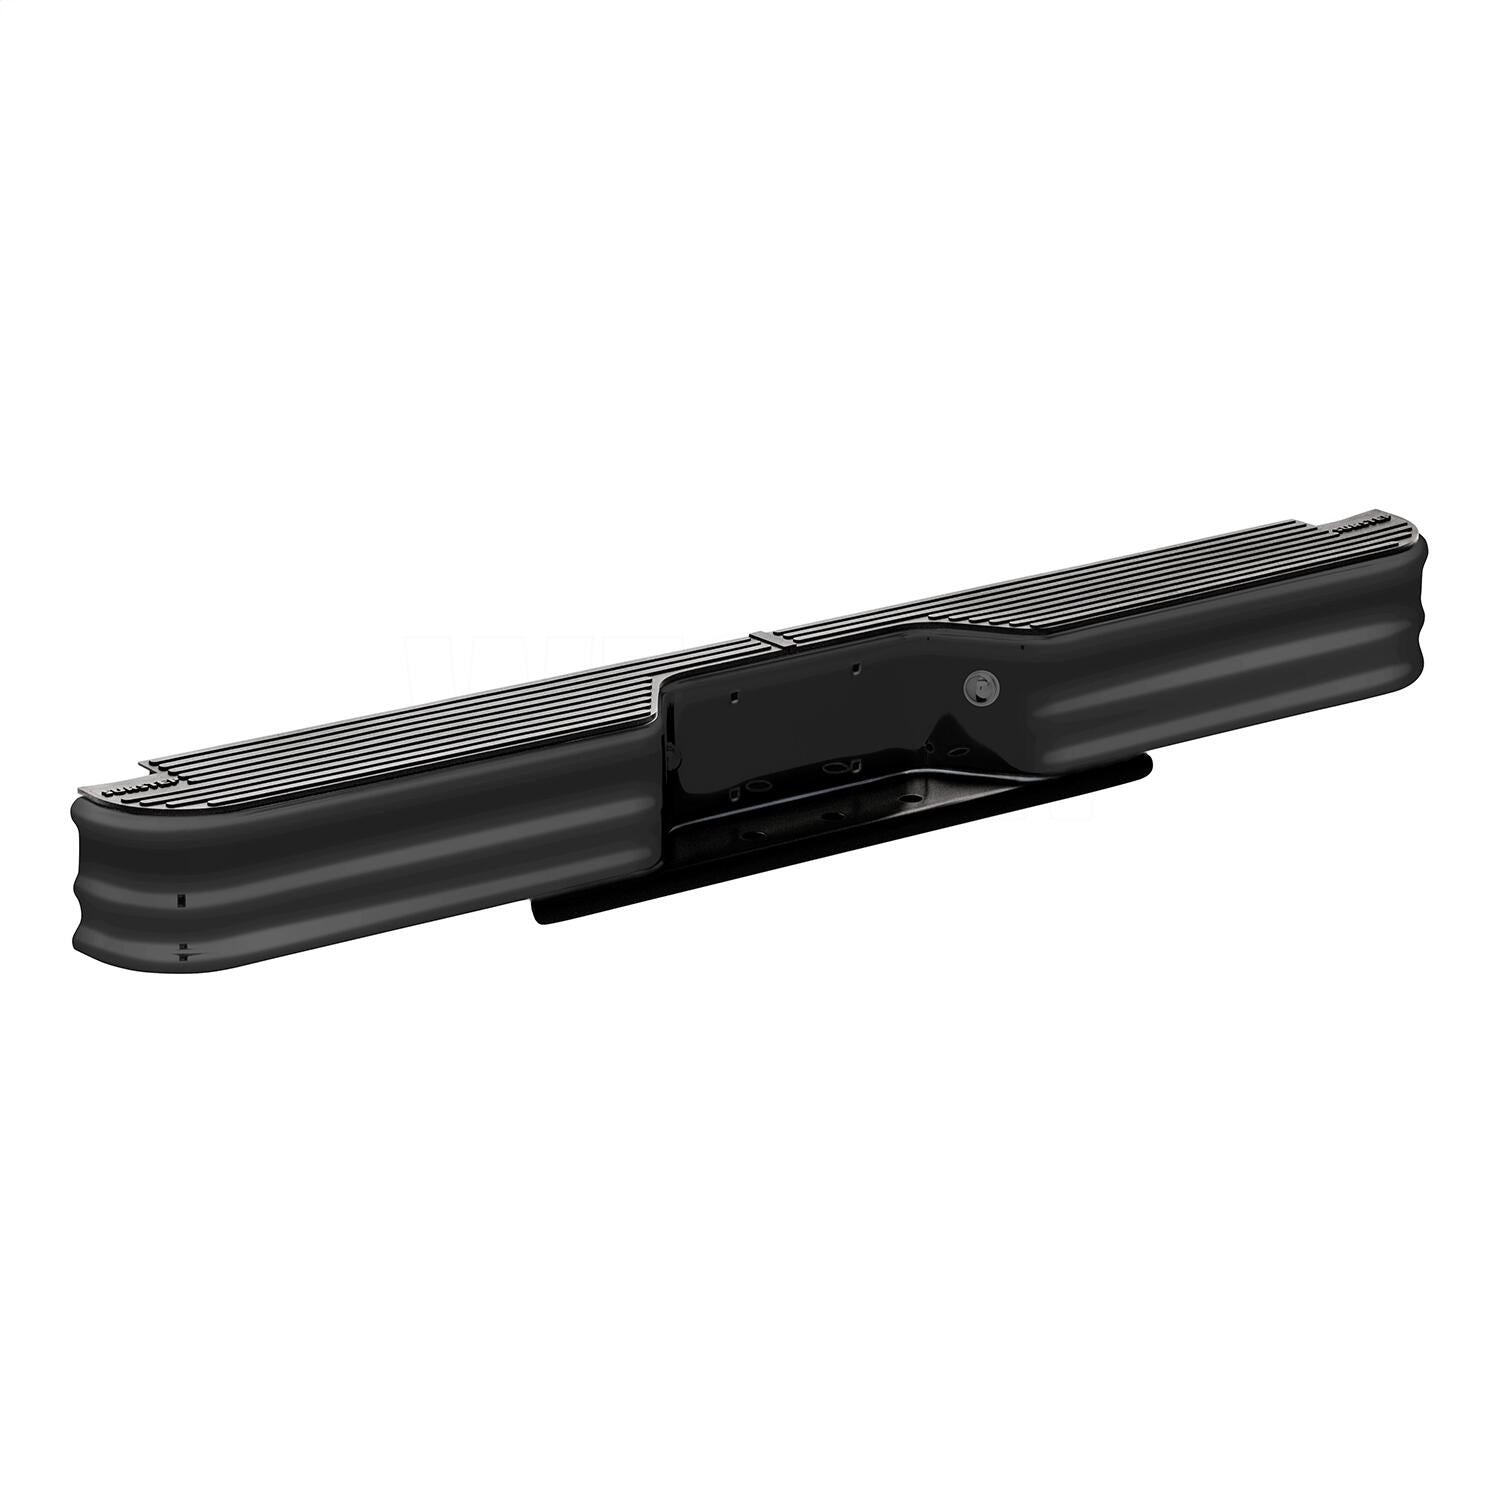 Surestep universal compact bumper blkrequires separate mount kit purchase